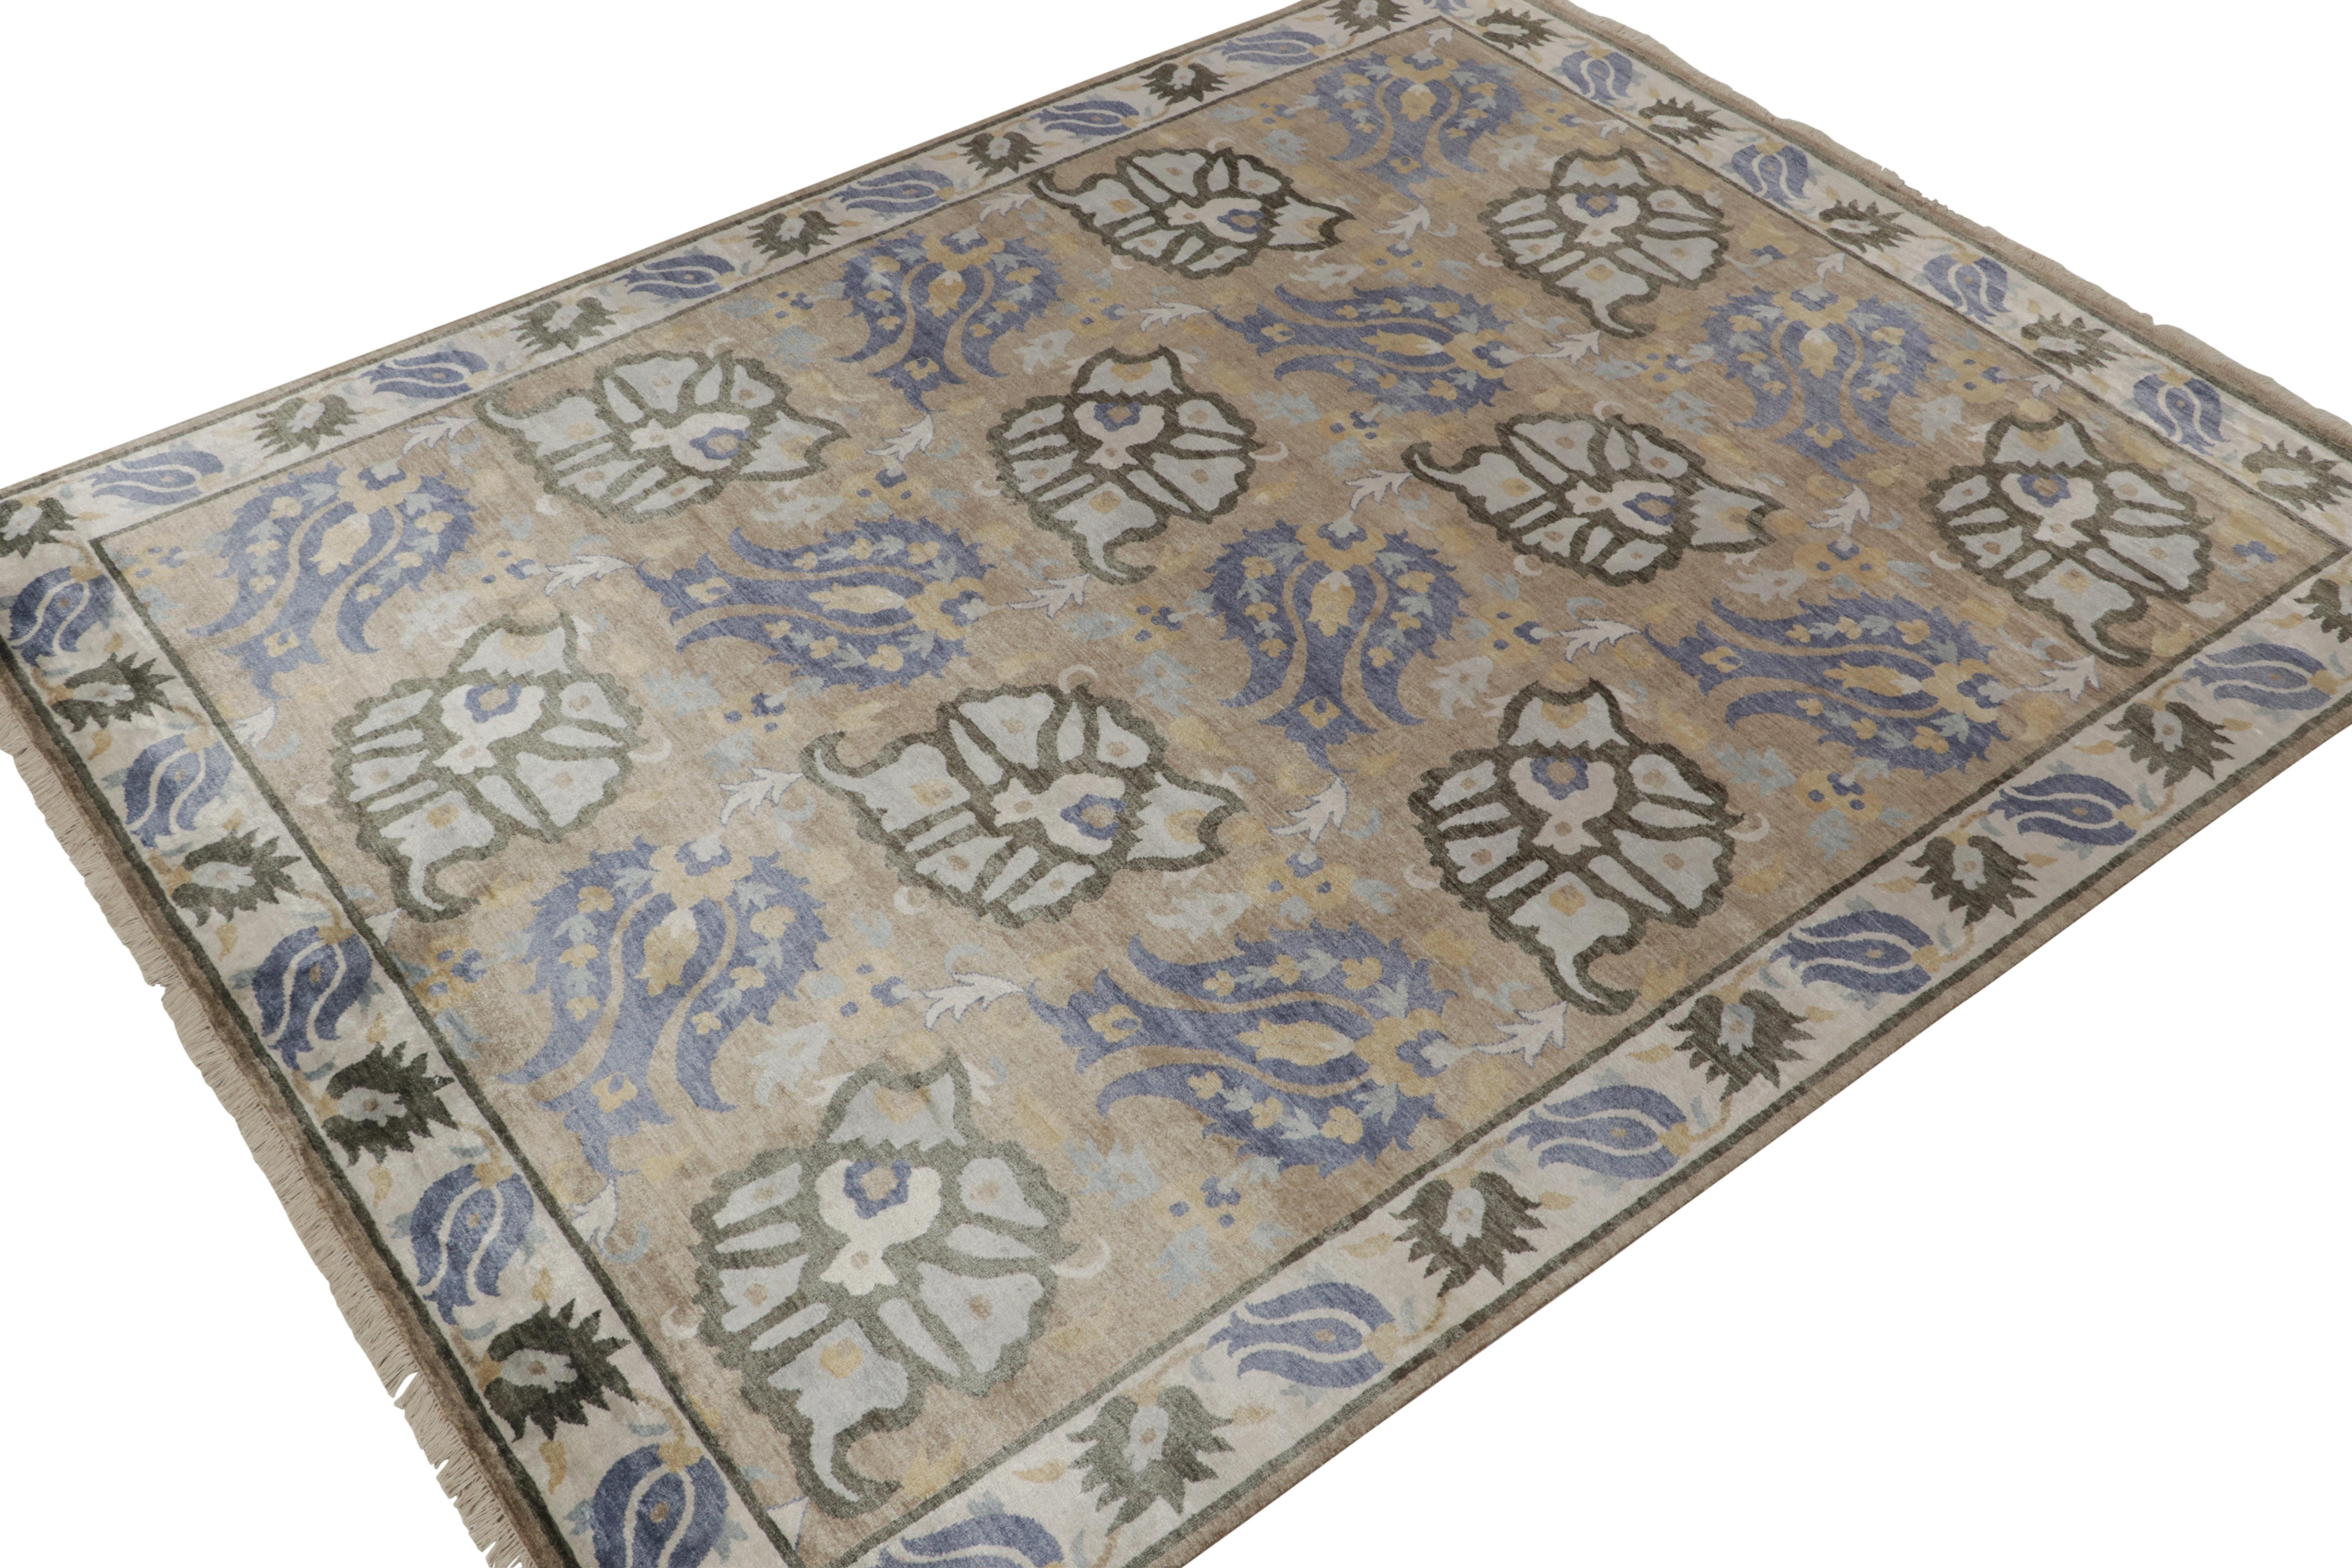 An 8x10 rug inspired from traditional rug styles, from Rug & Kilim’s Modern Classics Collection. Hand knotted in wool and silk, with an exceptional blue, beige-brown, gold and white in floral patterns from rare styles.
Further on the design:
The